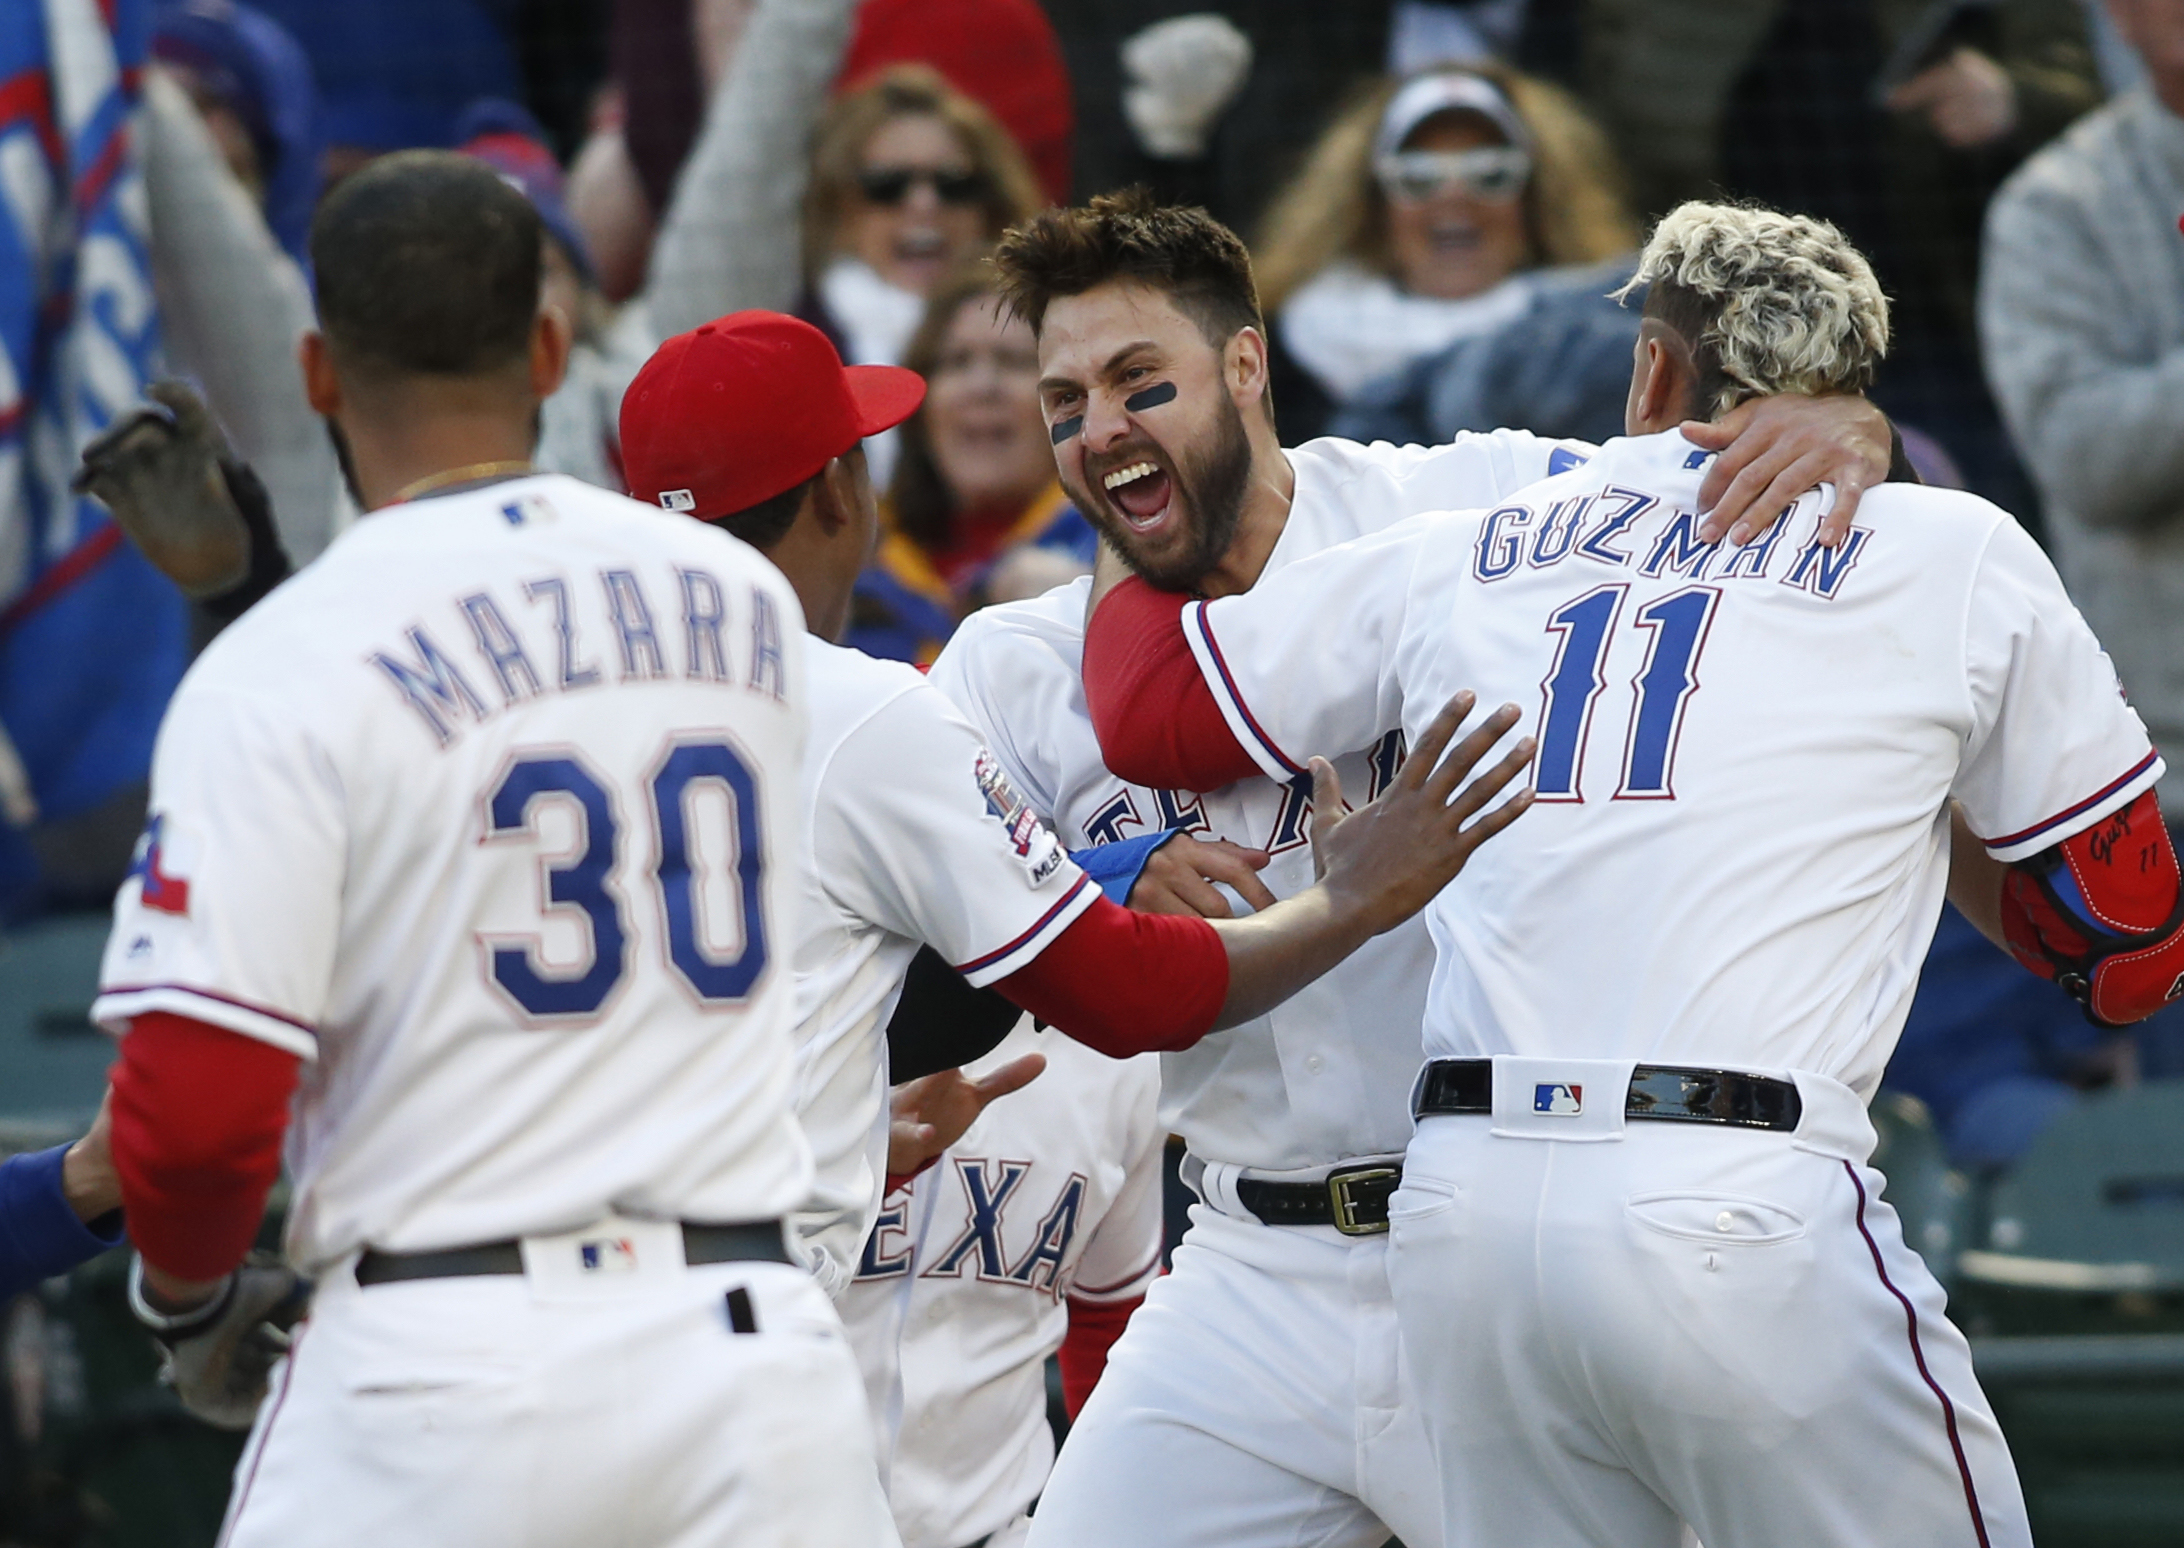 Texas Rangers Encore Game Broadcasts Will Begin on Originally Scheduled